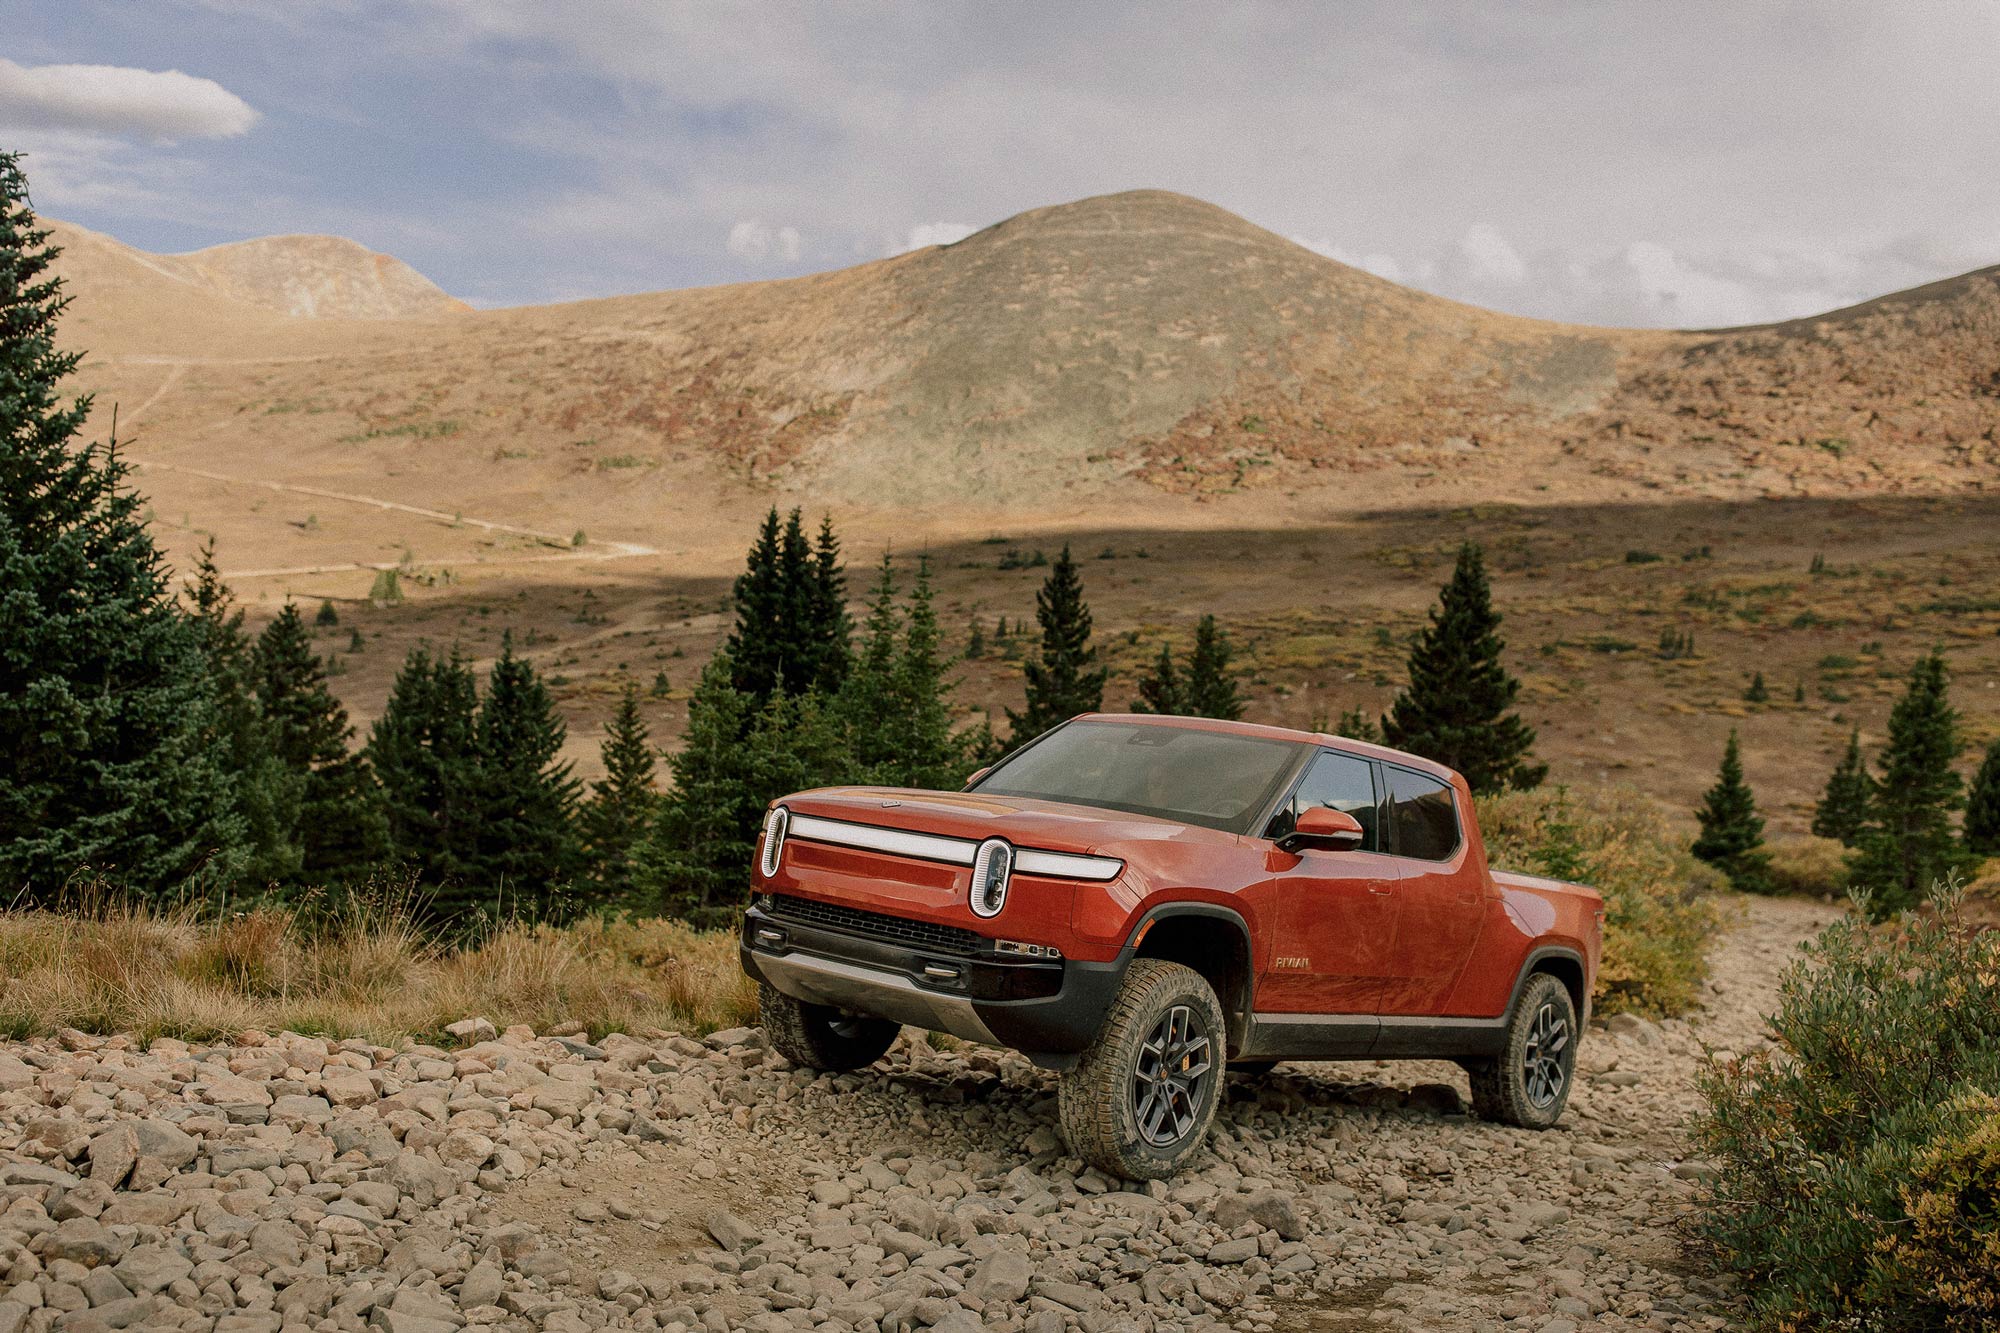 Rivian R1T electric pickup truck drives up a rocky trail off-road.